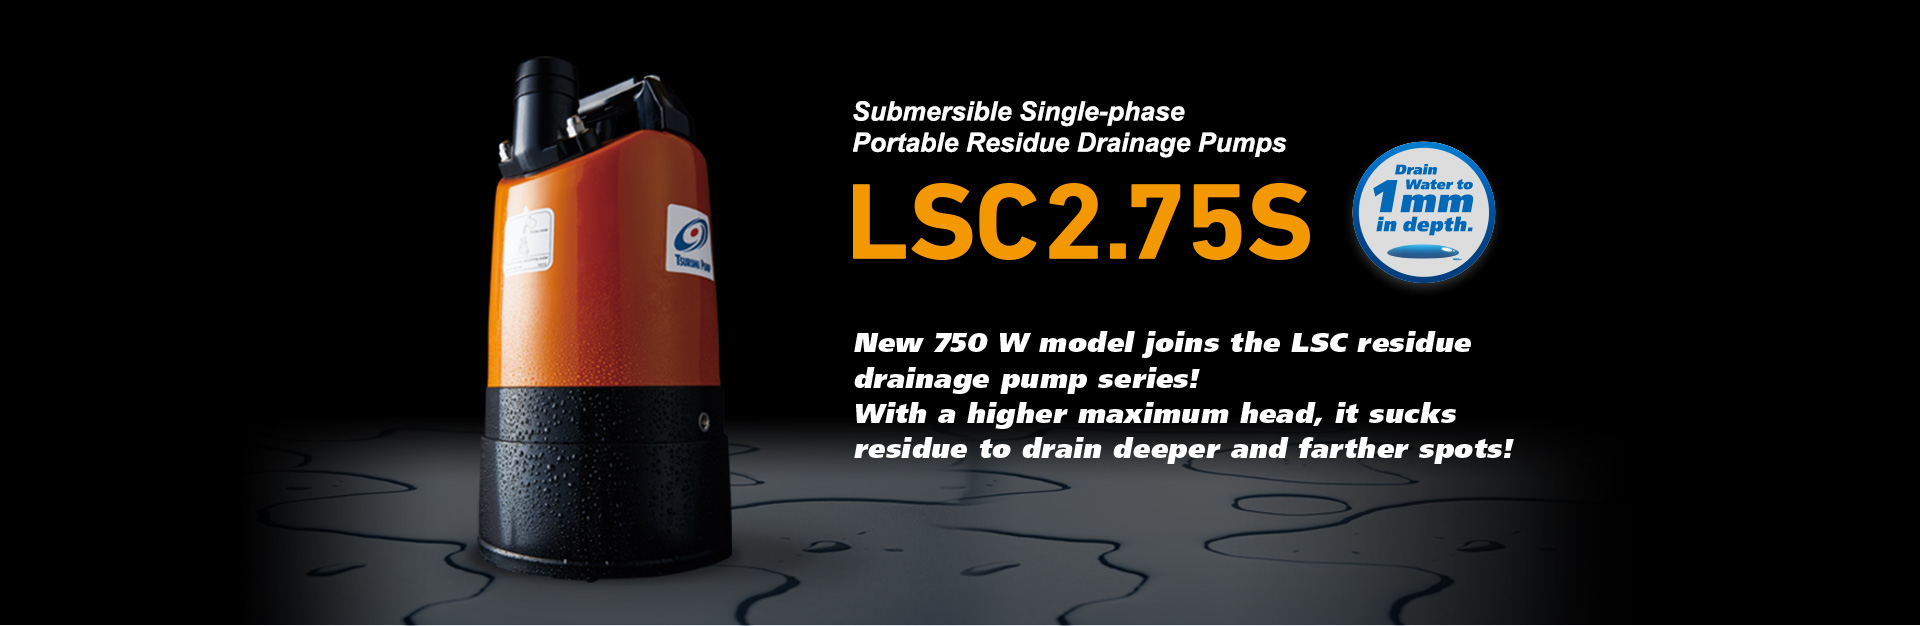 Submersible Single-phase Portable Residue Drainage Pumps LSC2.75S